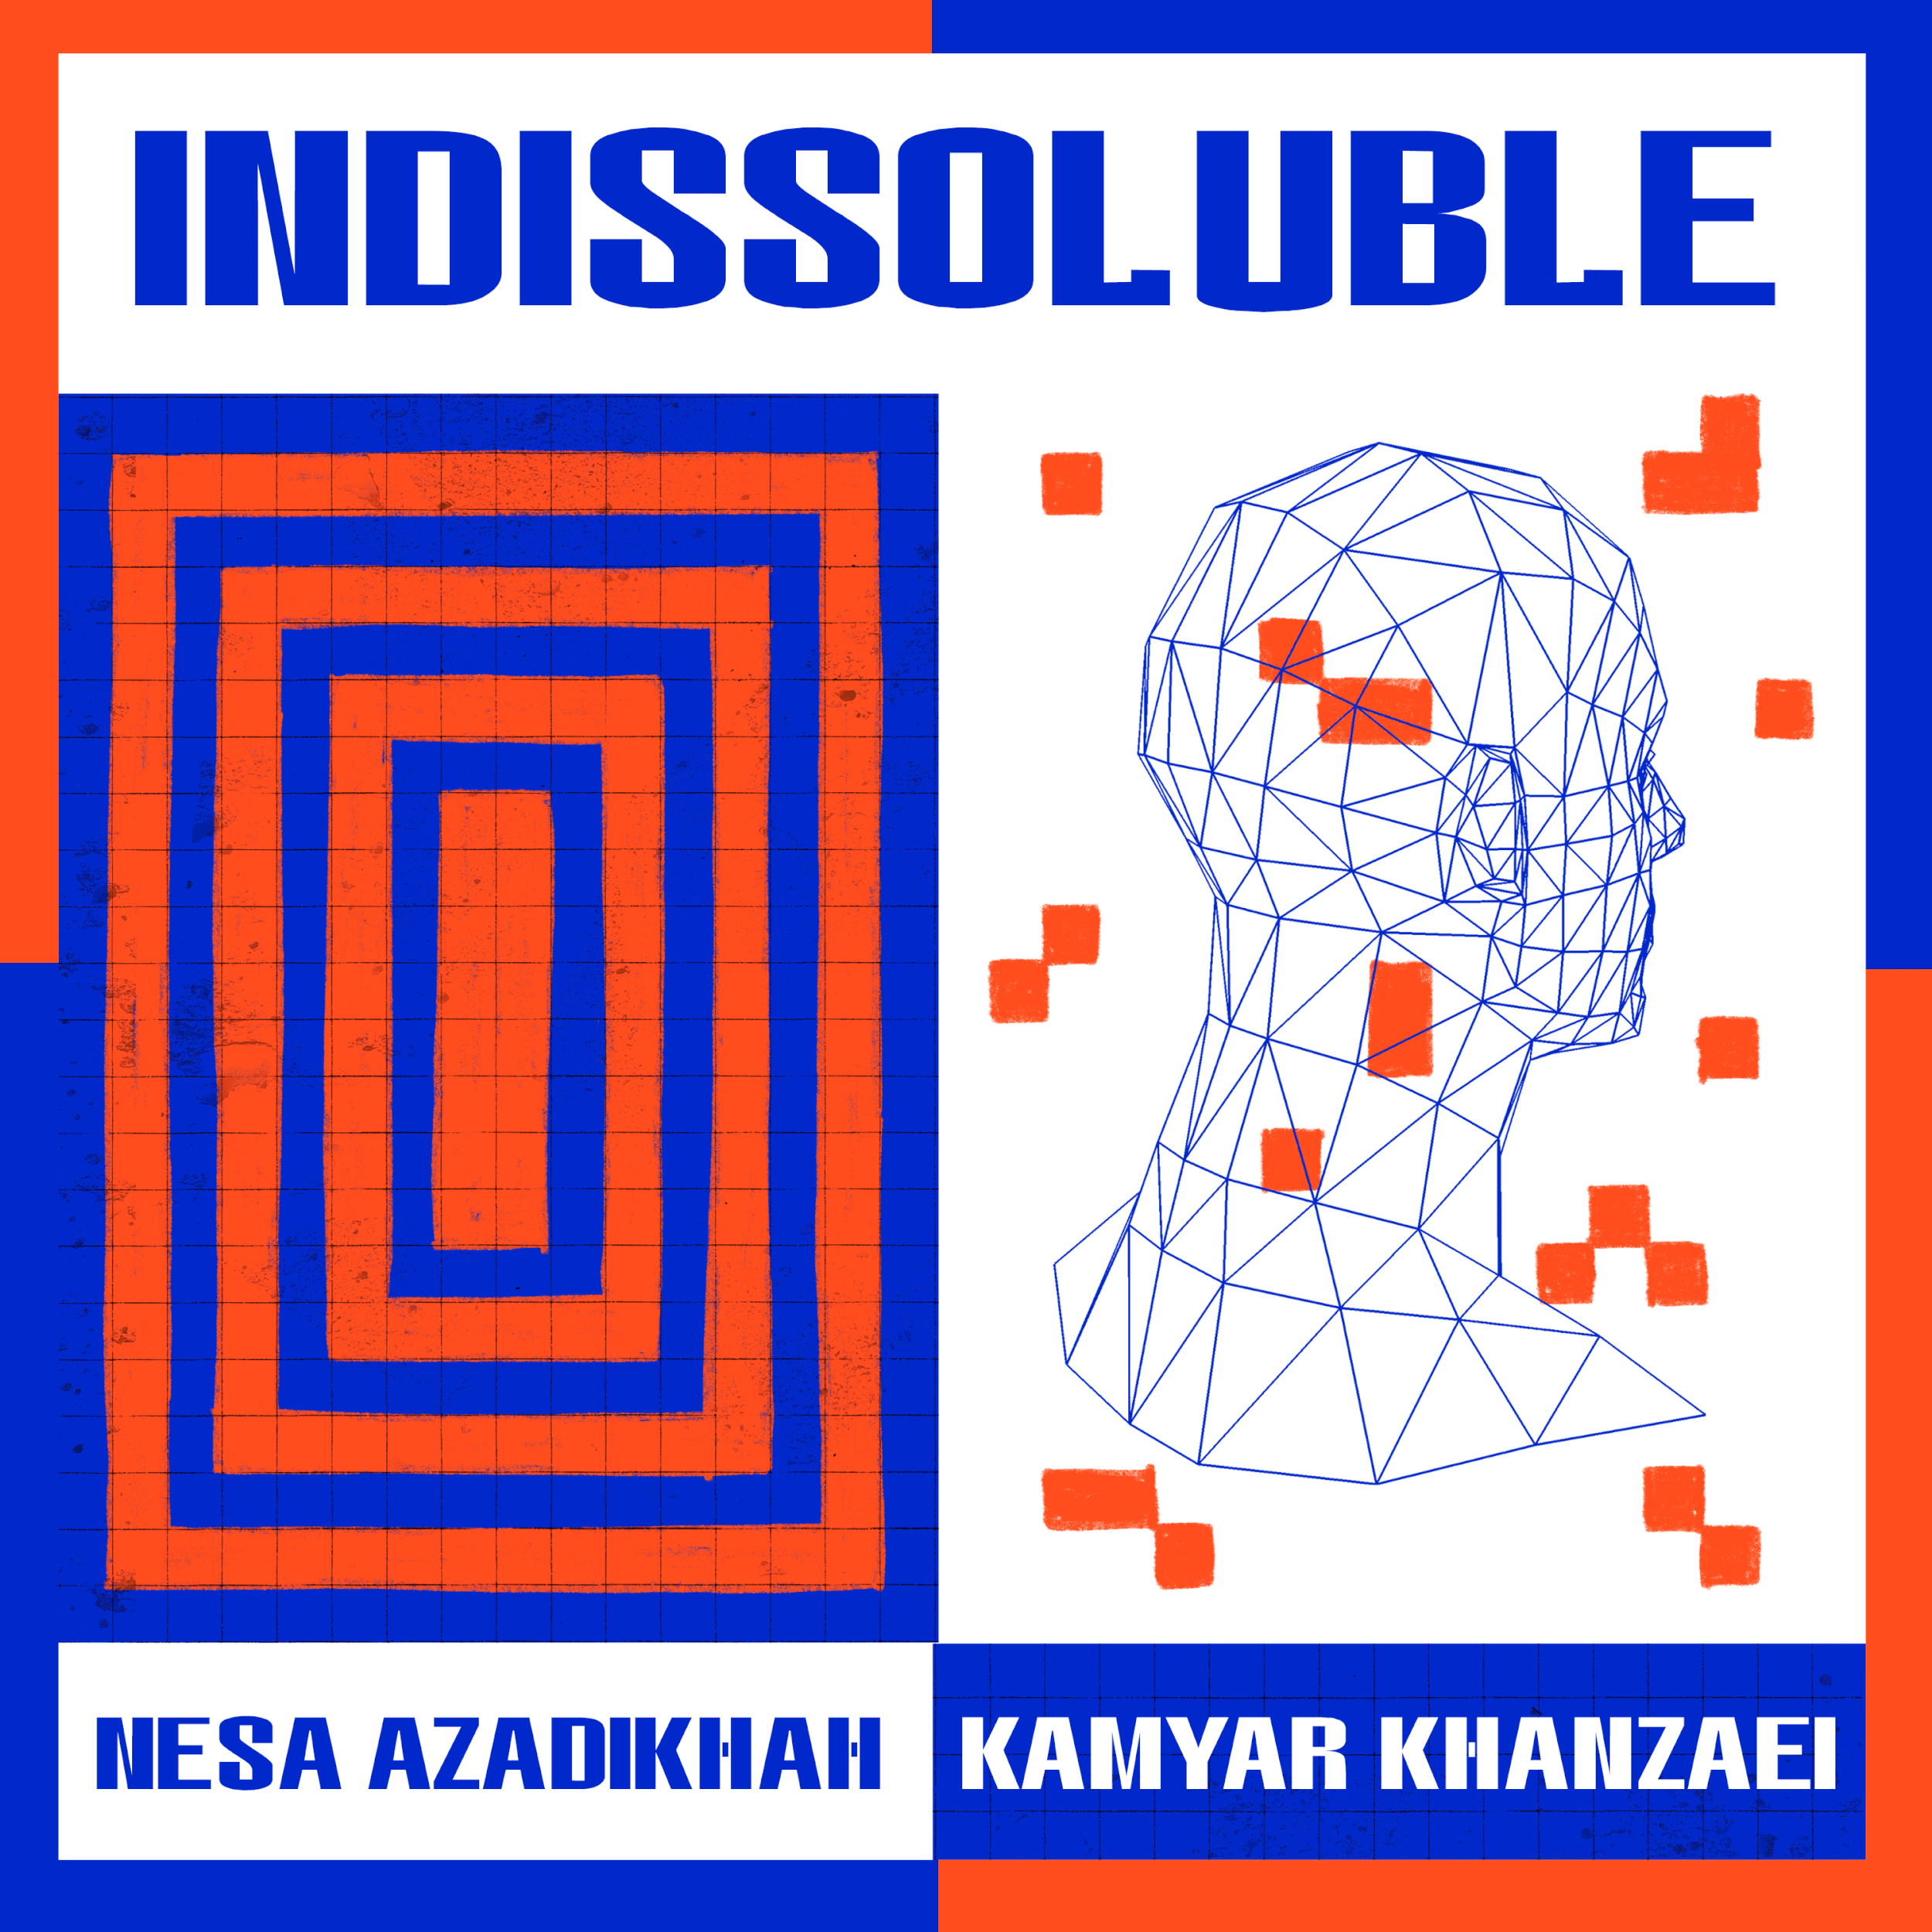 Indissoluble Cover illustration and Animation